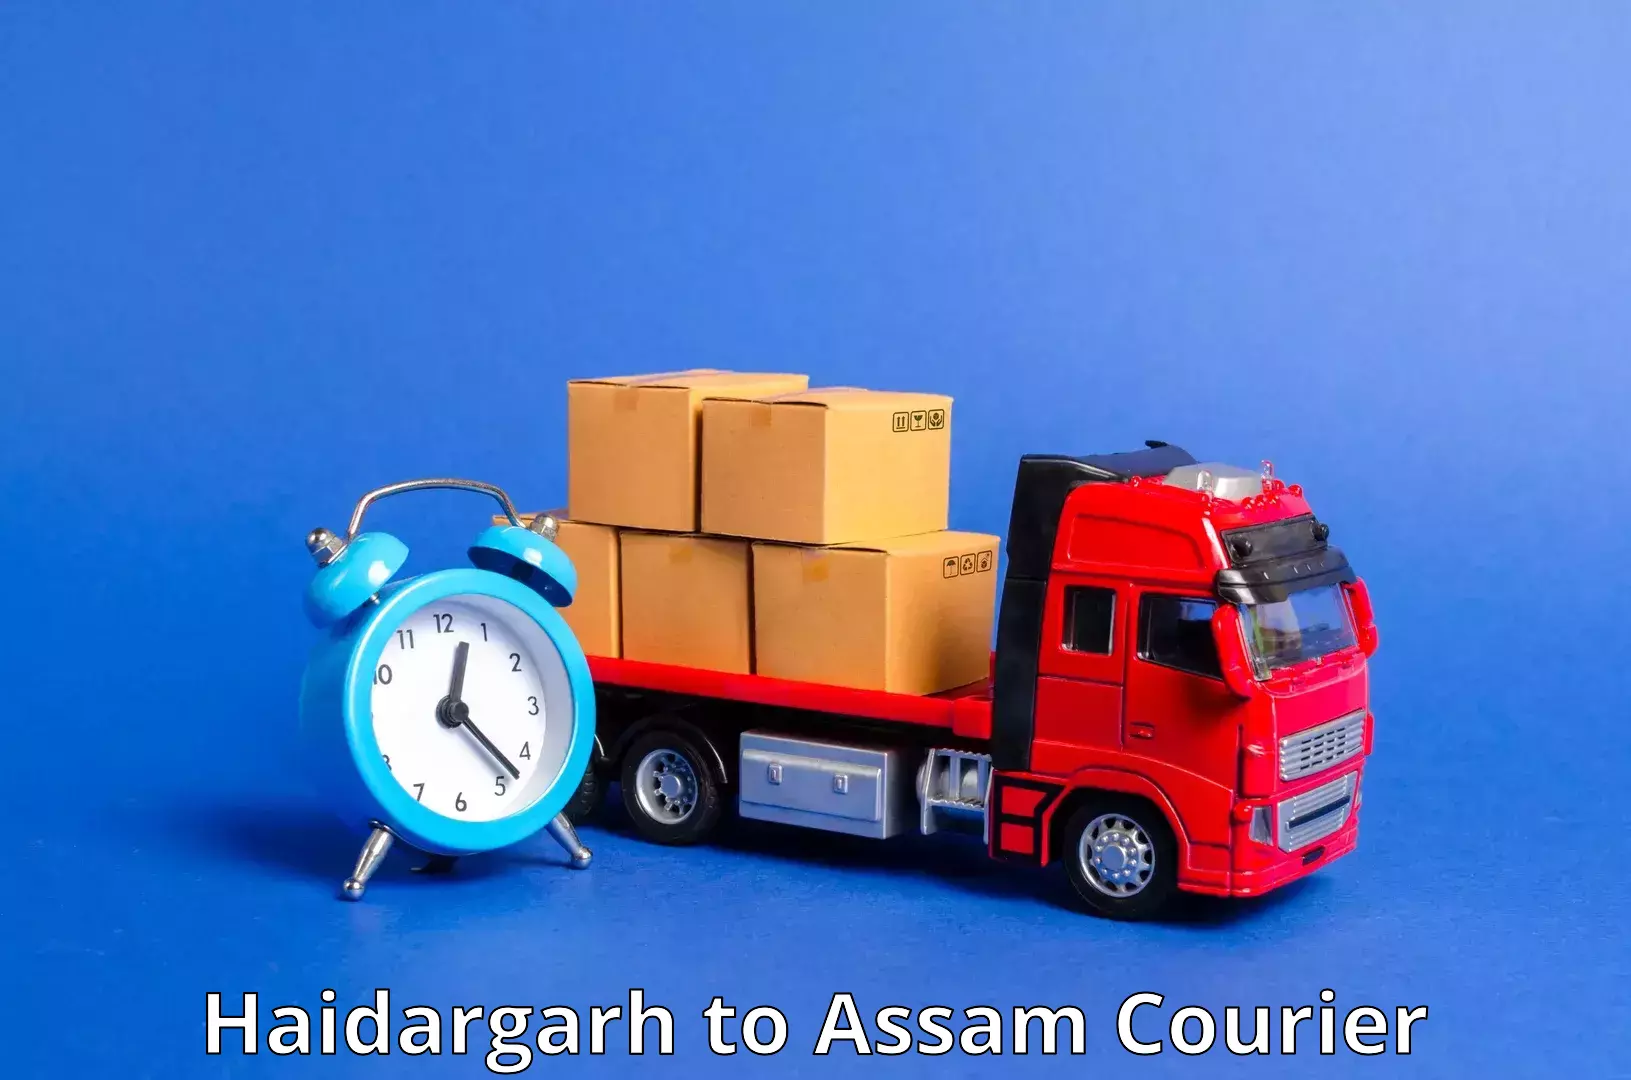 Express delivery network Haidargarh to Assam